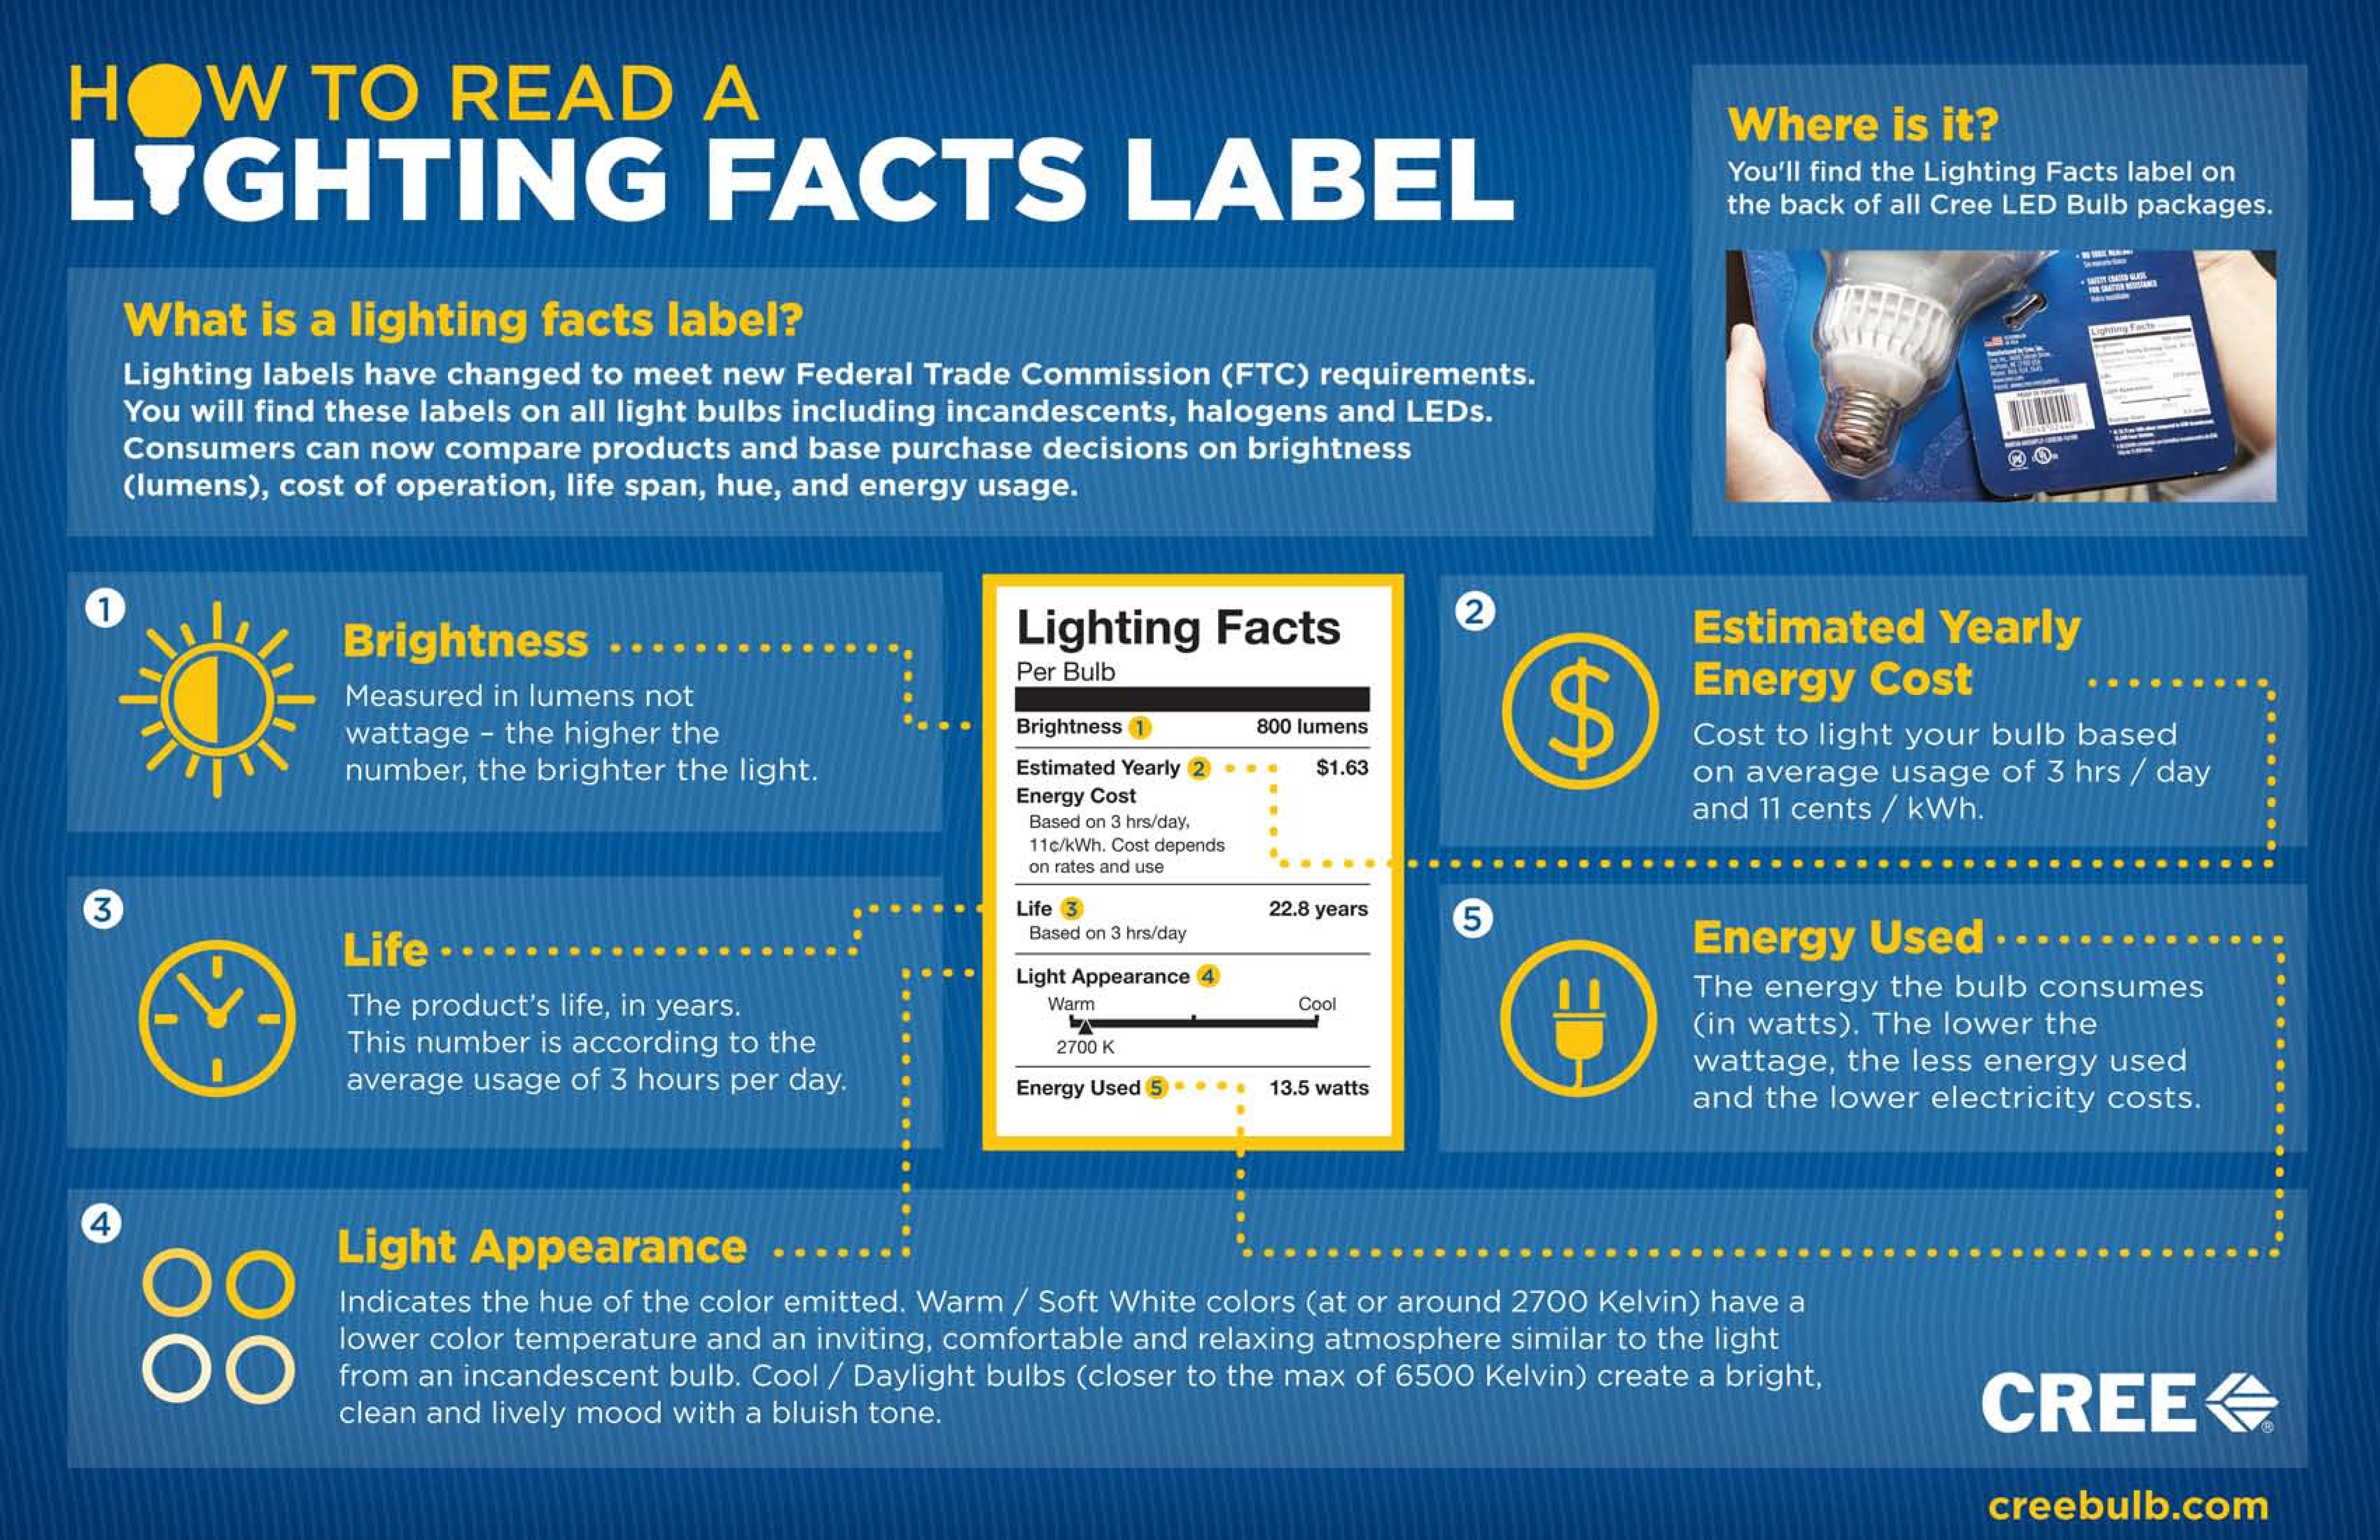 How to read a Lighting Facts Label infographic